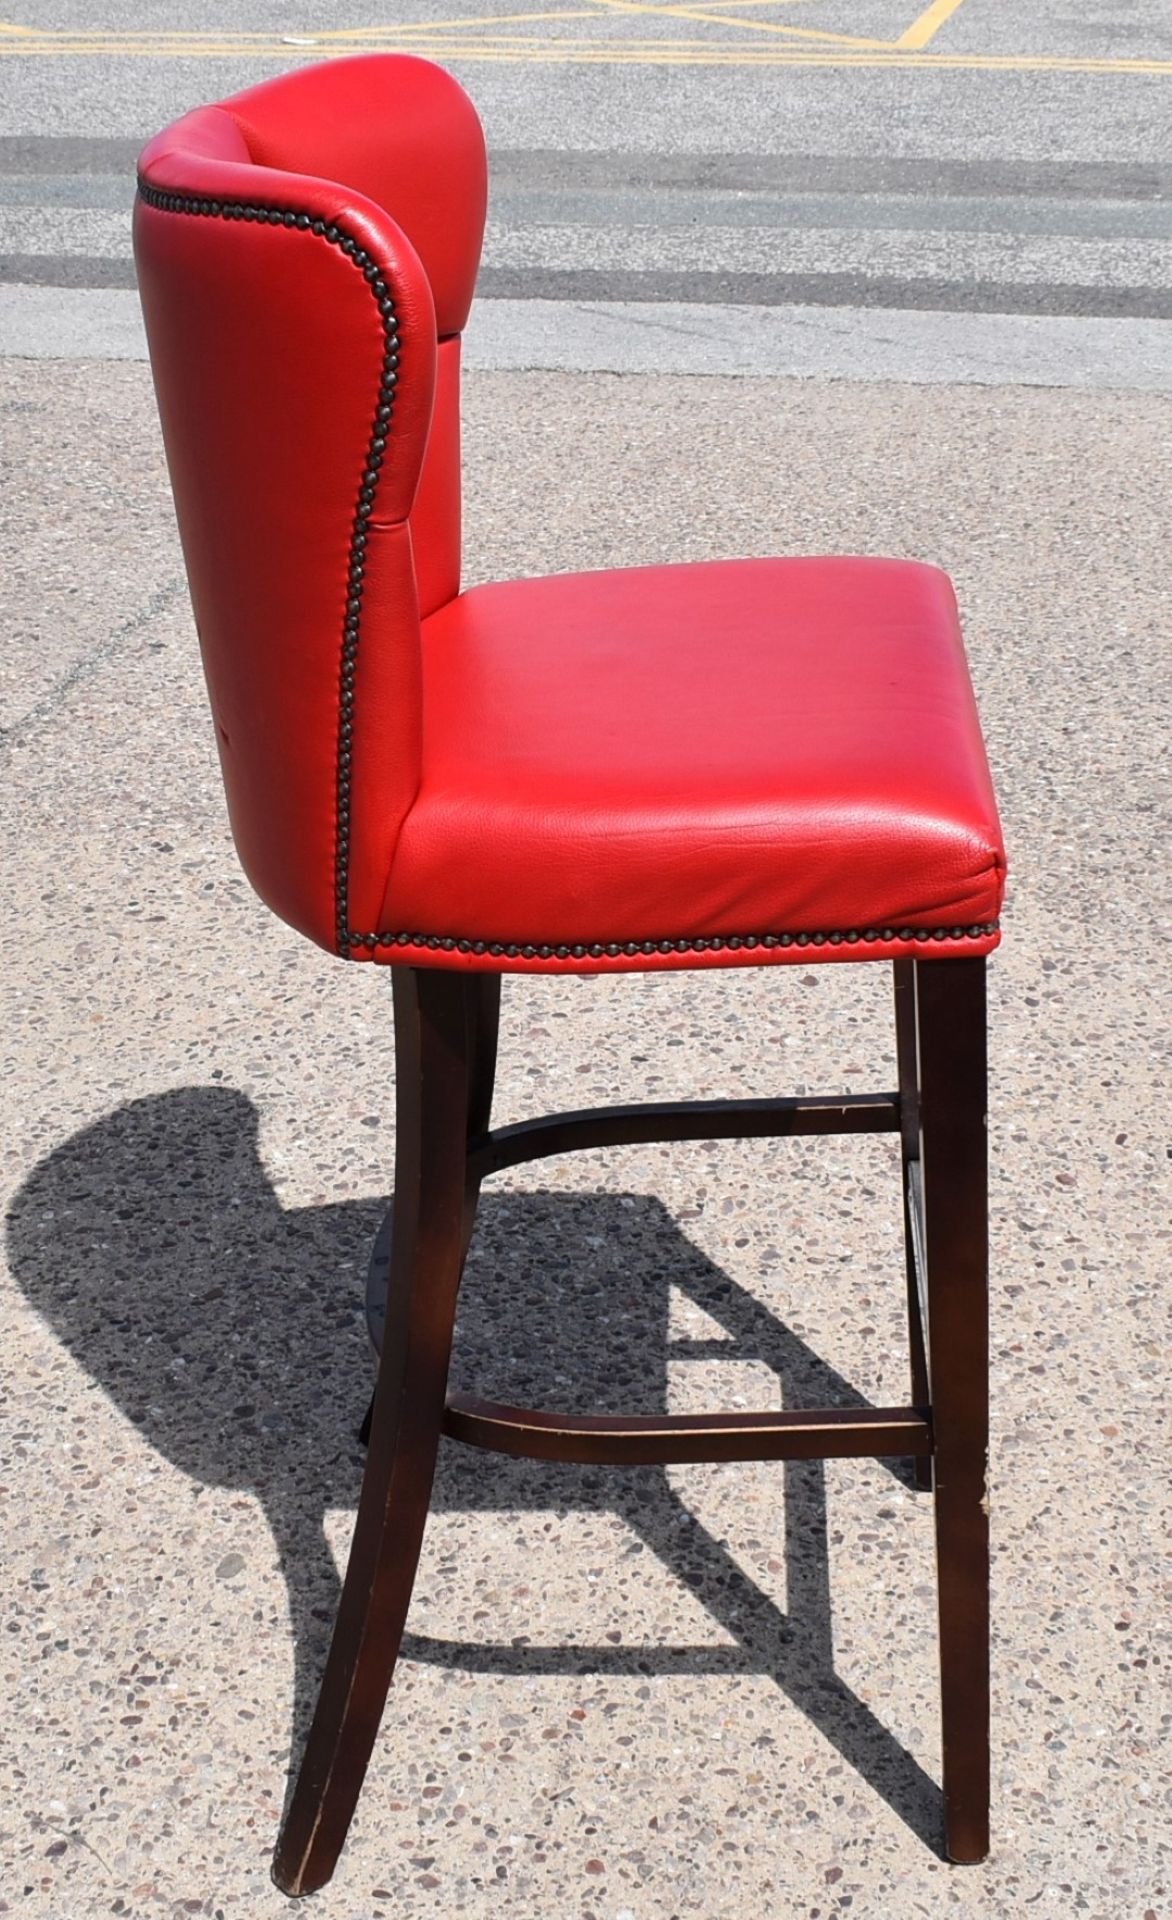 4 x Bar Stools Featuring Genuine Red Leather Studded Wingack Seats, Wooden Sloped Legs and Footrests - Image 7 of 12